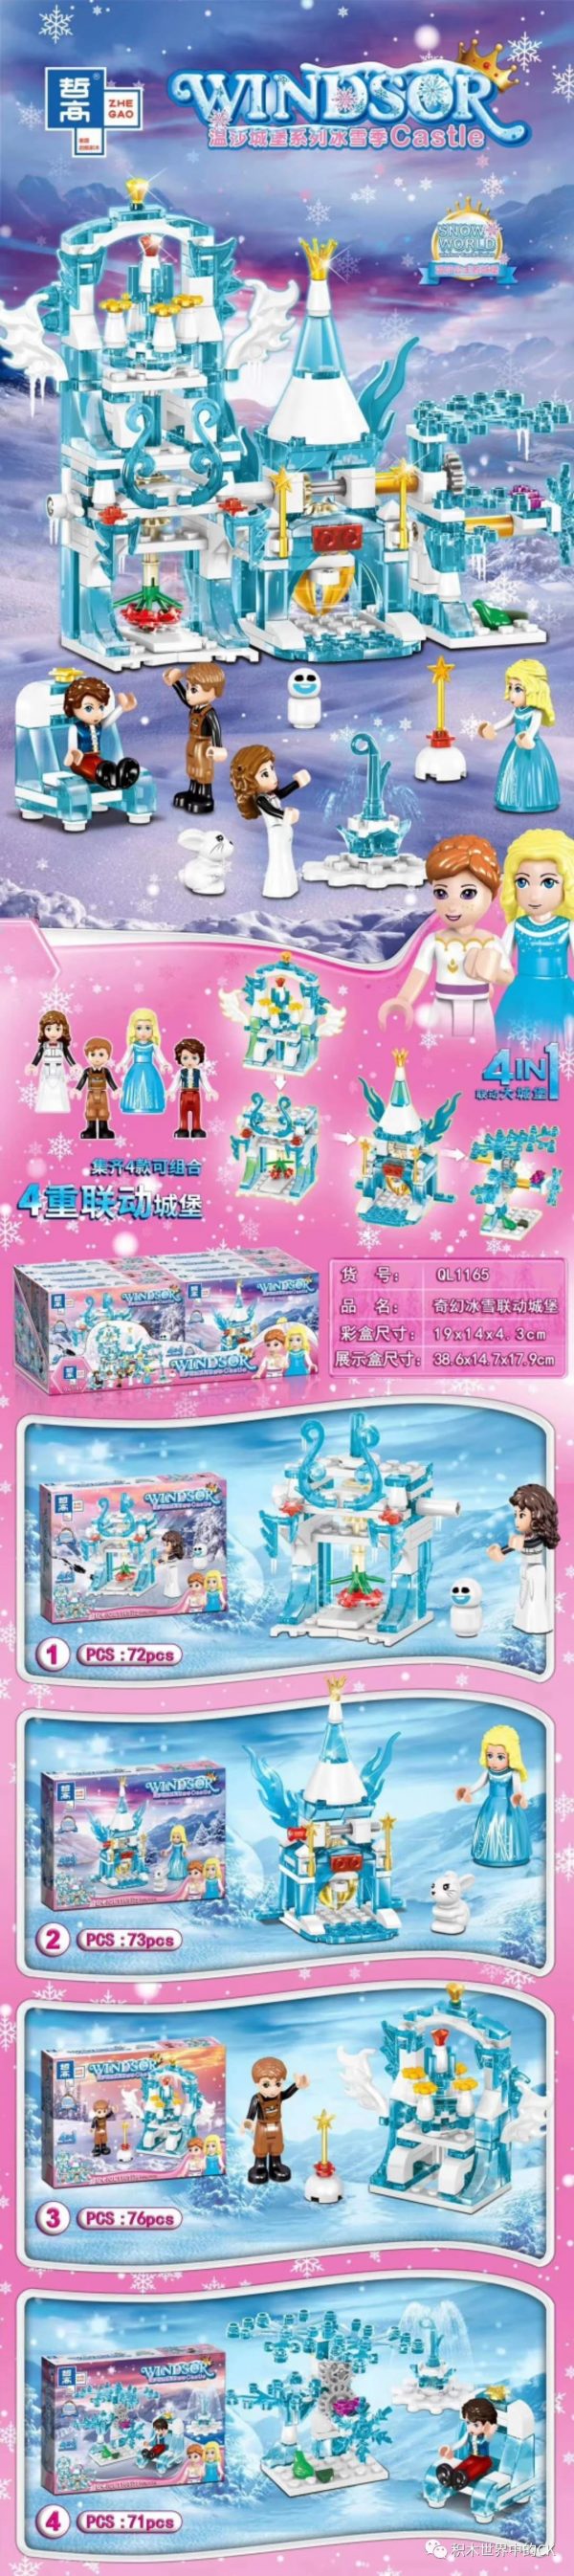 ZHEGAO QL1165 Windsor Castle Series Ice and Snow Season: Fantastic Ice and Snow Link Castle 4 combinations 0